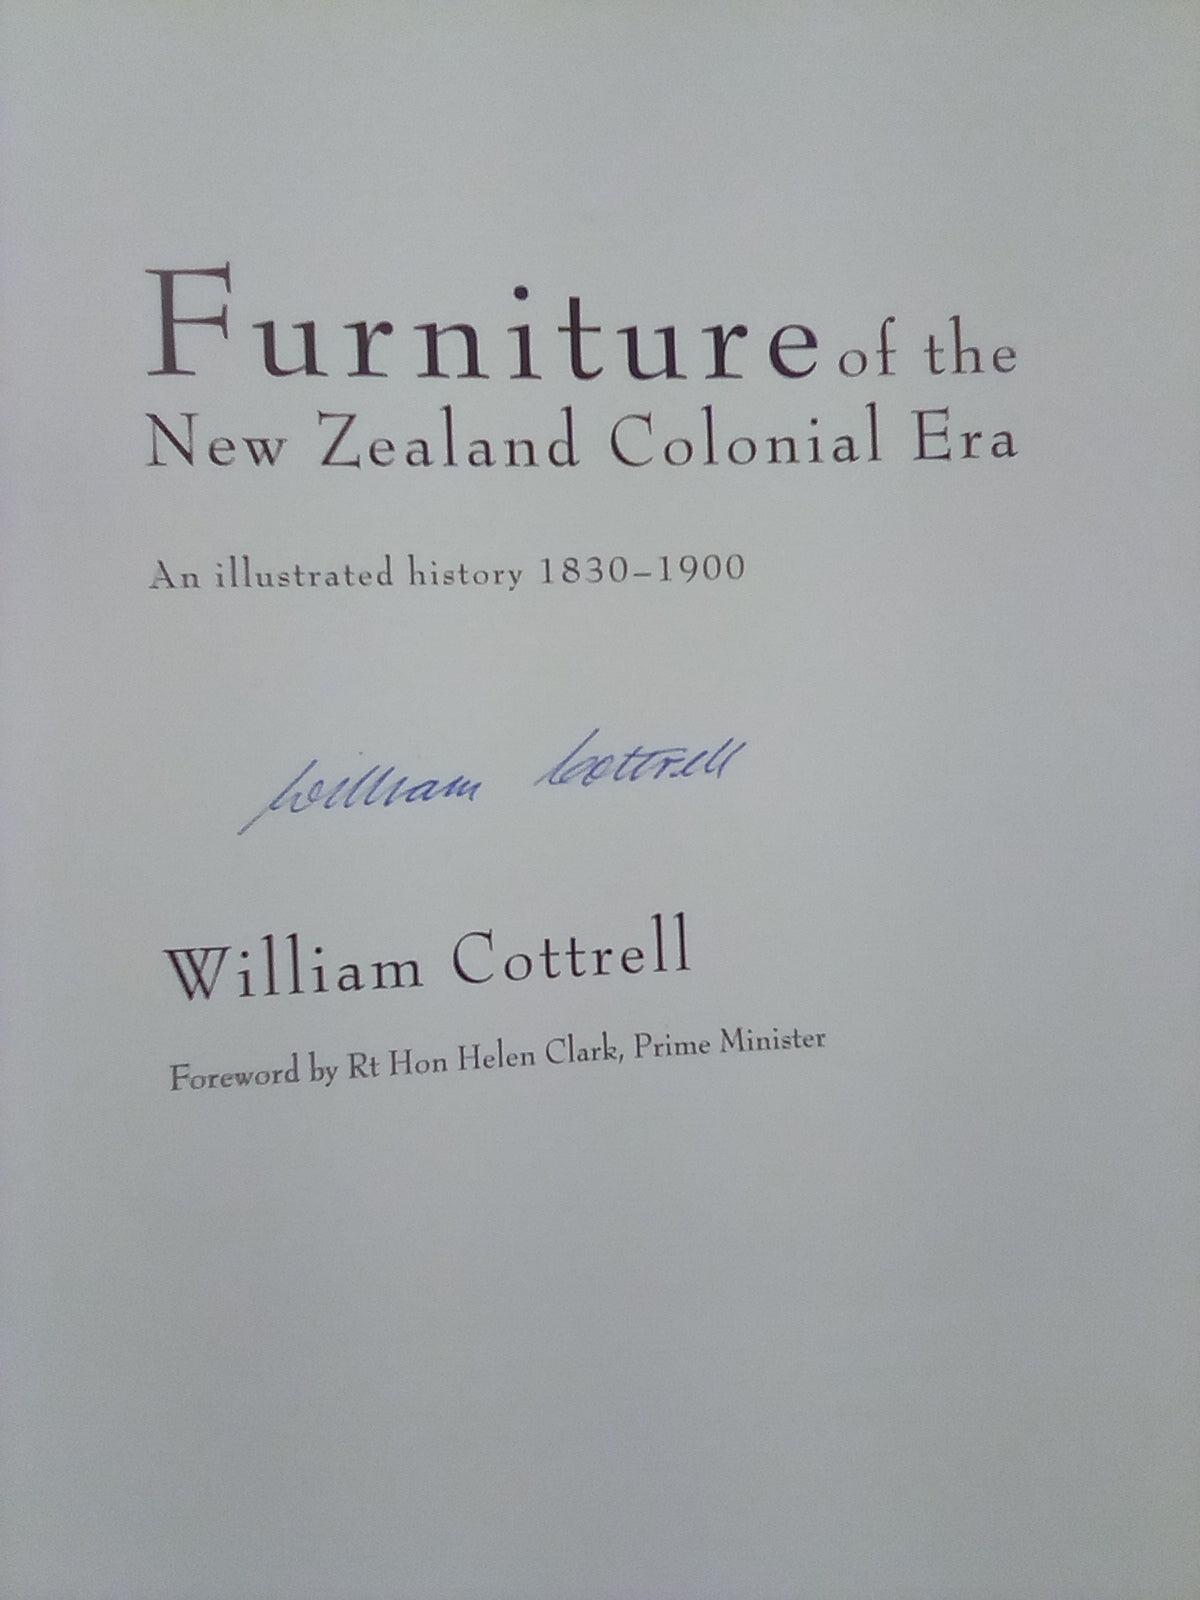 Furniture of the New Zealand Colonial Era 1830-1900 (Signed Copy) by William Cottrell